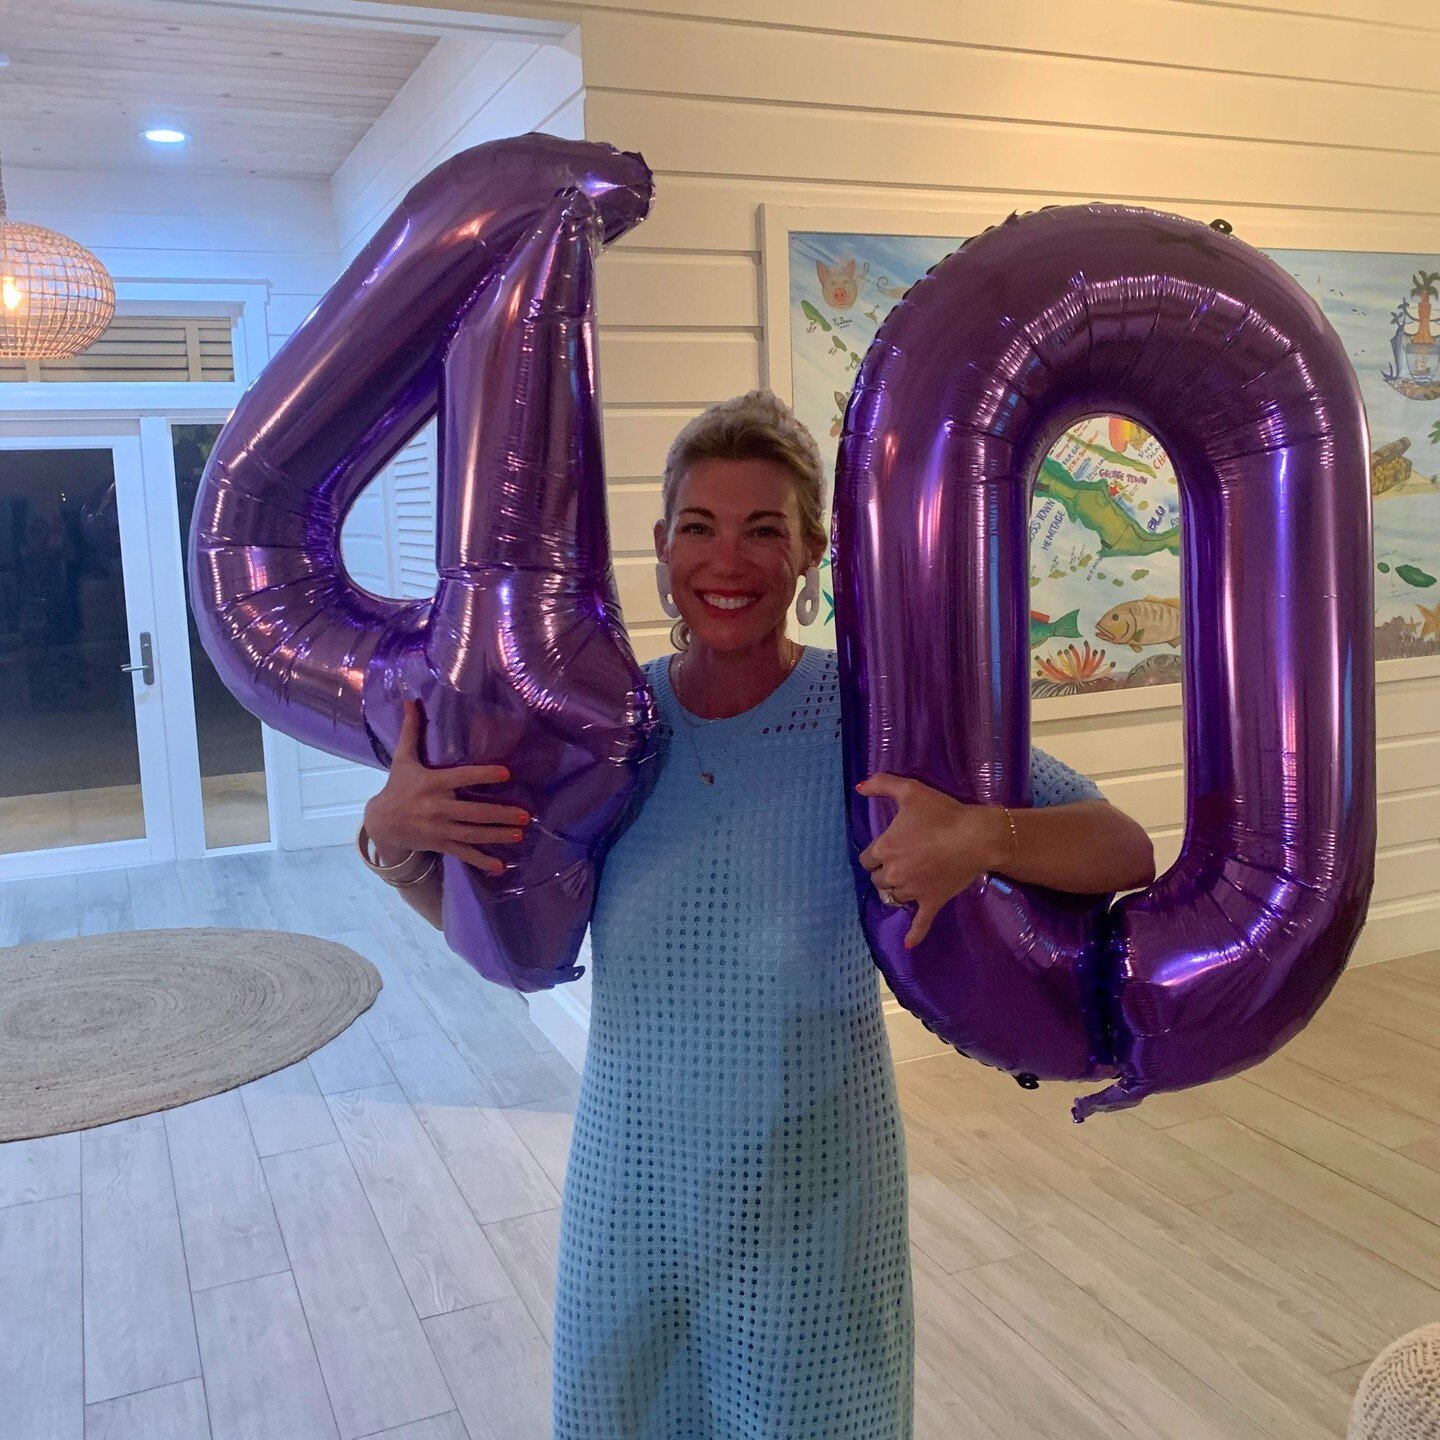 New on the blog! Turning 40 and how I'm feeling about it.

Is Courtney having a mid-life crisis? 
Maybe.

If you're close to being 40 or have already been there, you can relate. It's not as scary as it sounds, it's a beautiful stage of life that I'm 